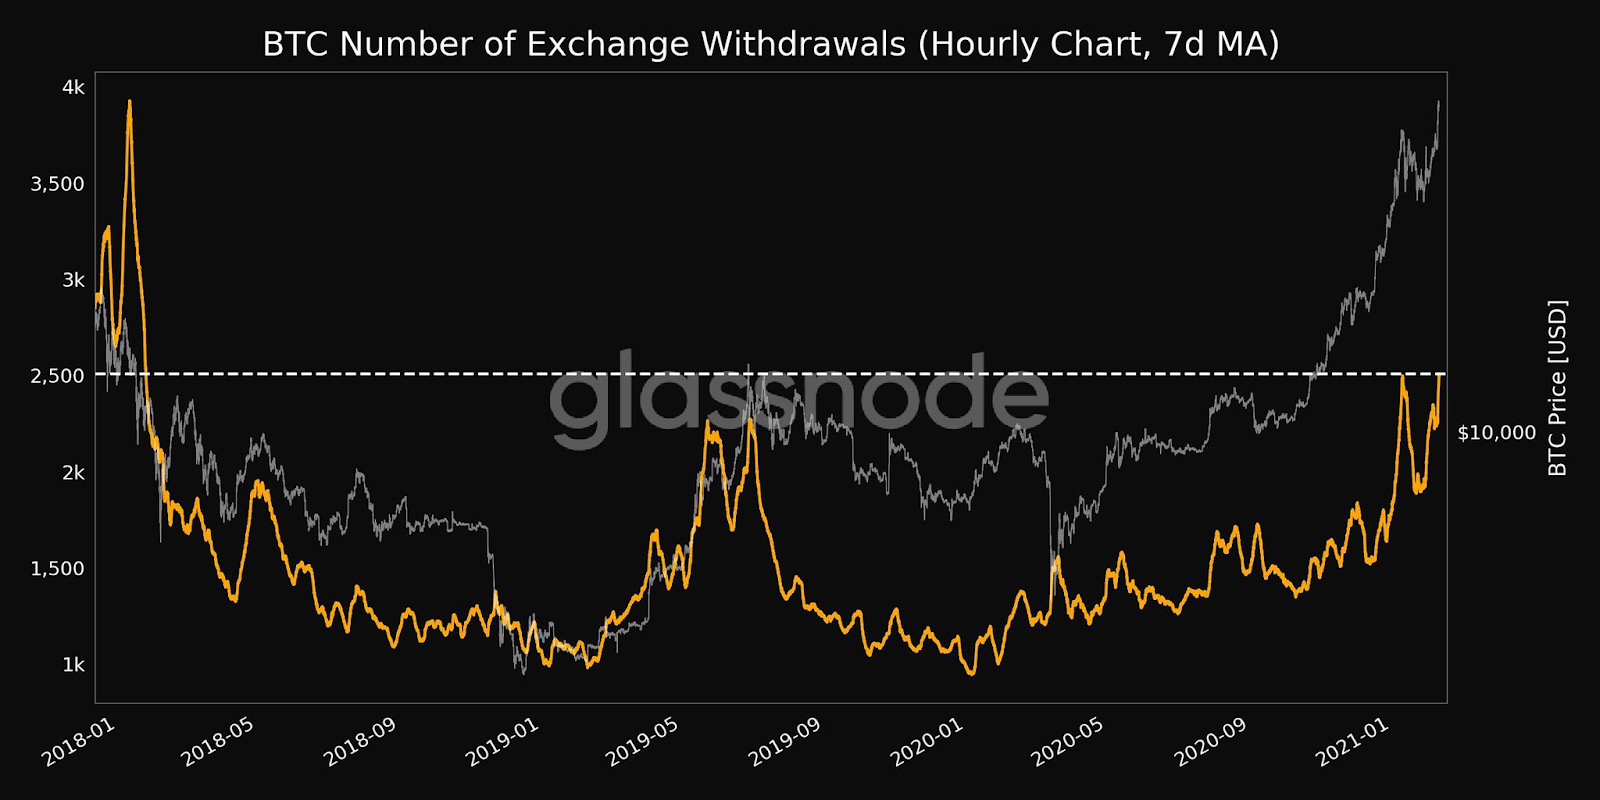 Bitcoin Withdrawals From Exchanges Increase to a 3-Year High